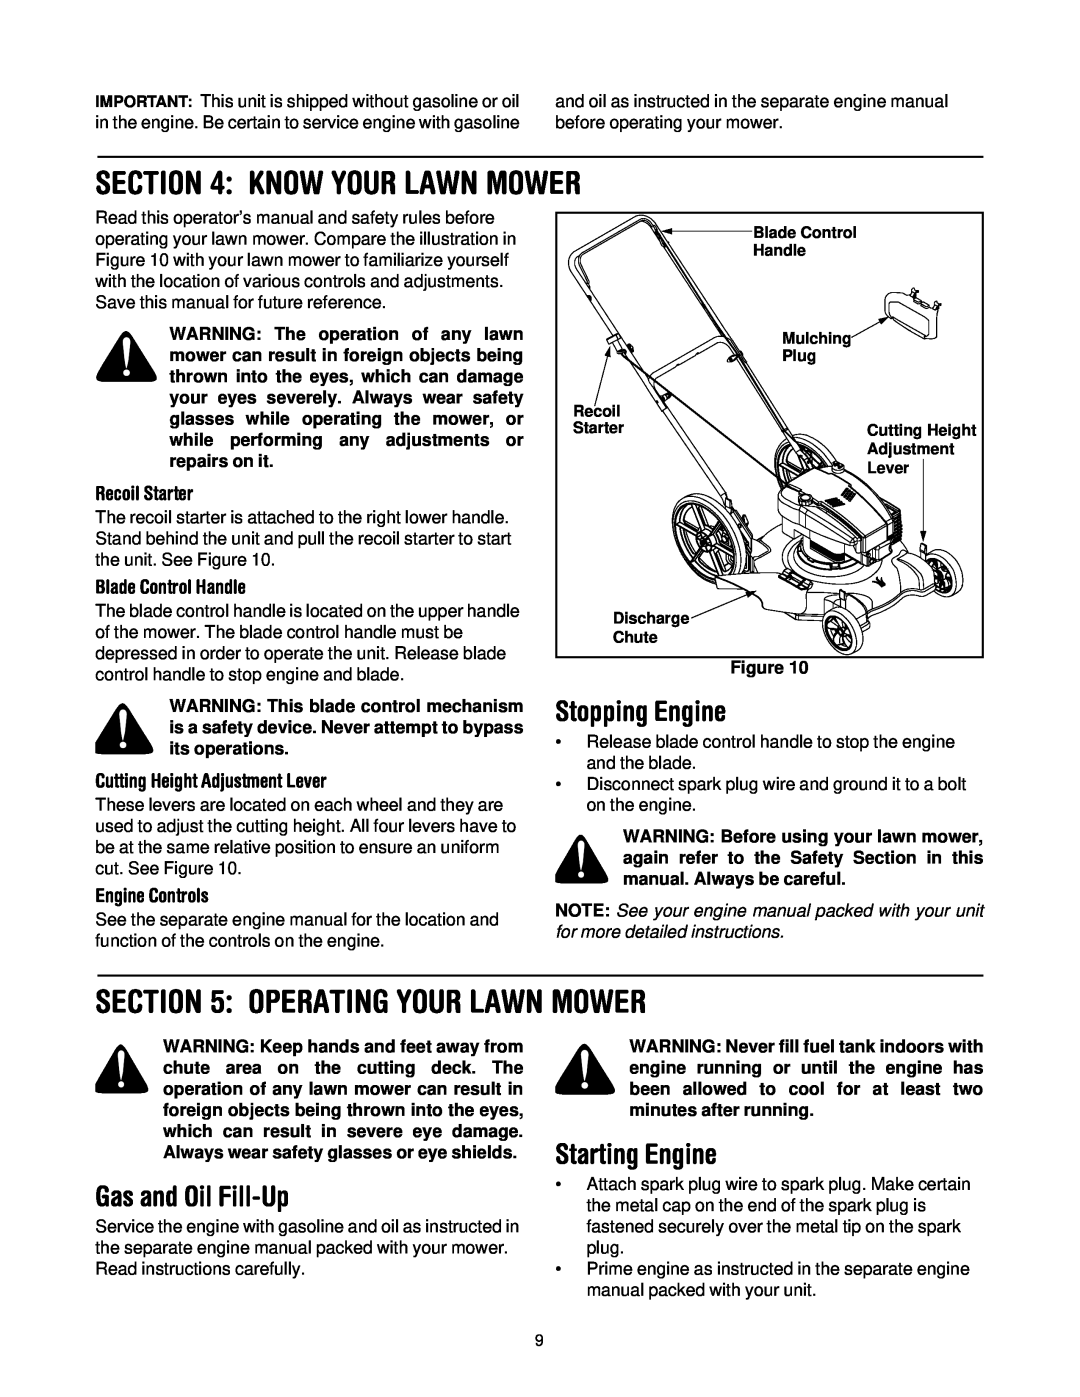 Yard-Man 503 manual Know Your Lawn Mower, Operating Your Lawn Mower, Stopping Engine, Gas and Oil Fill-Up, Starting Engine 